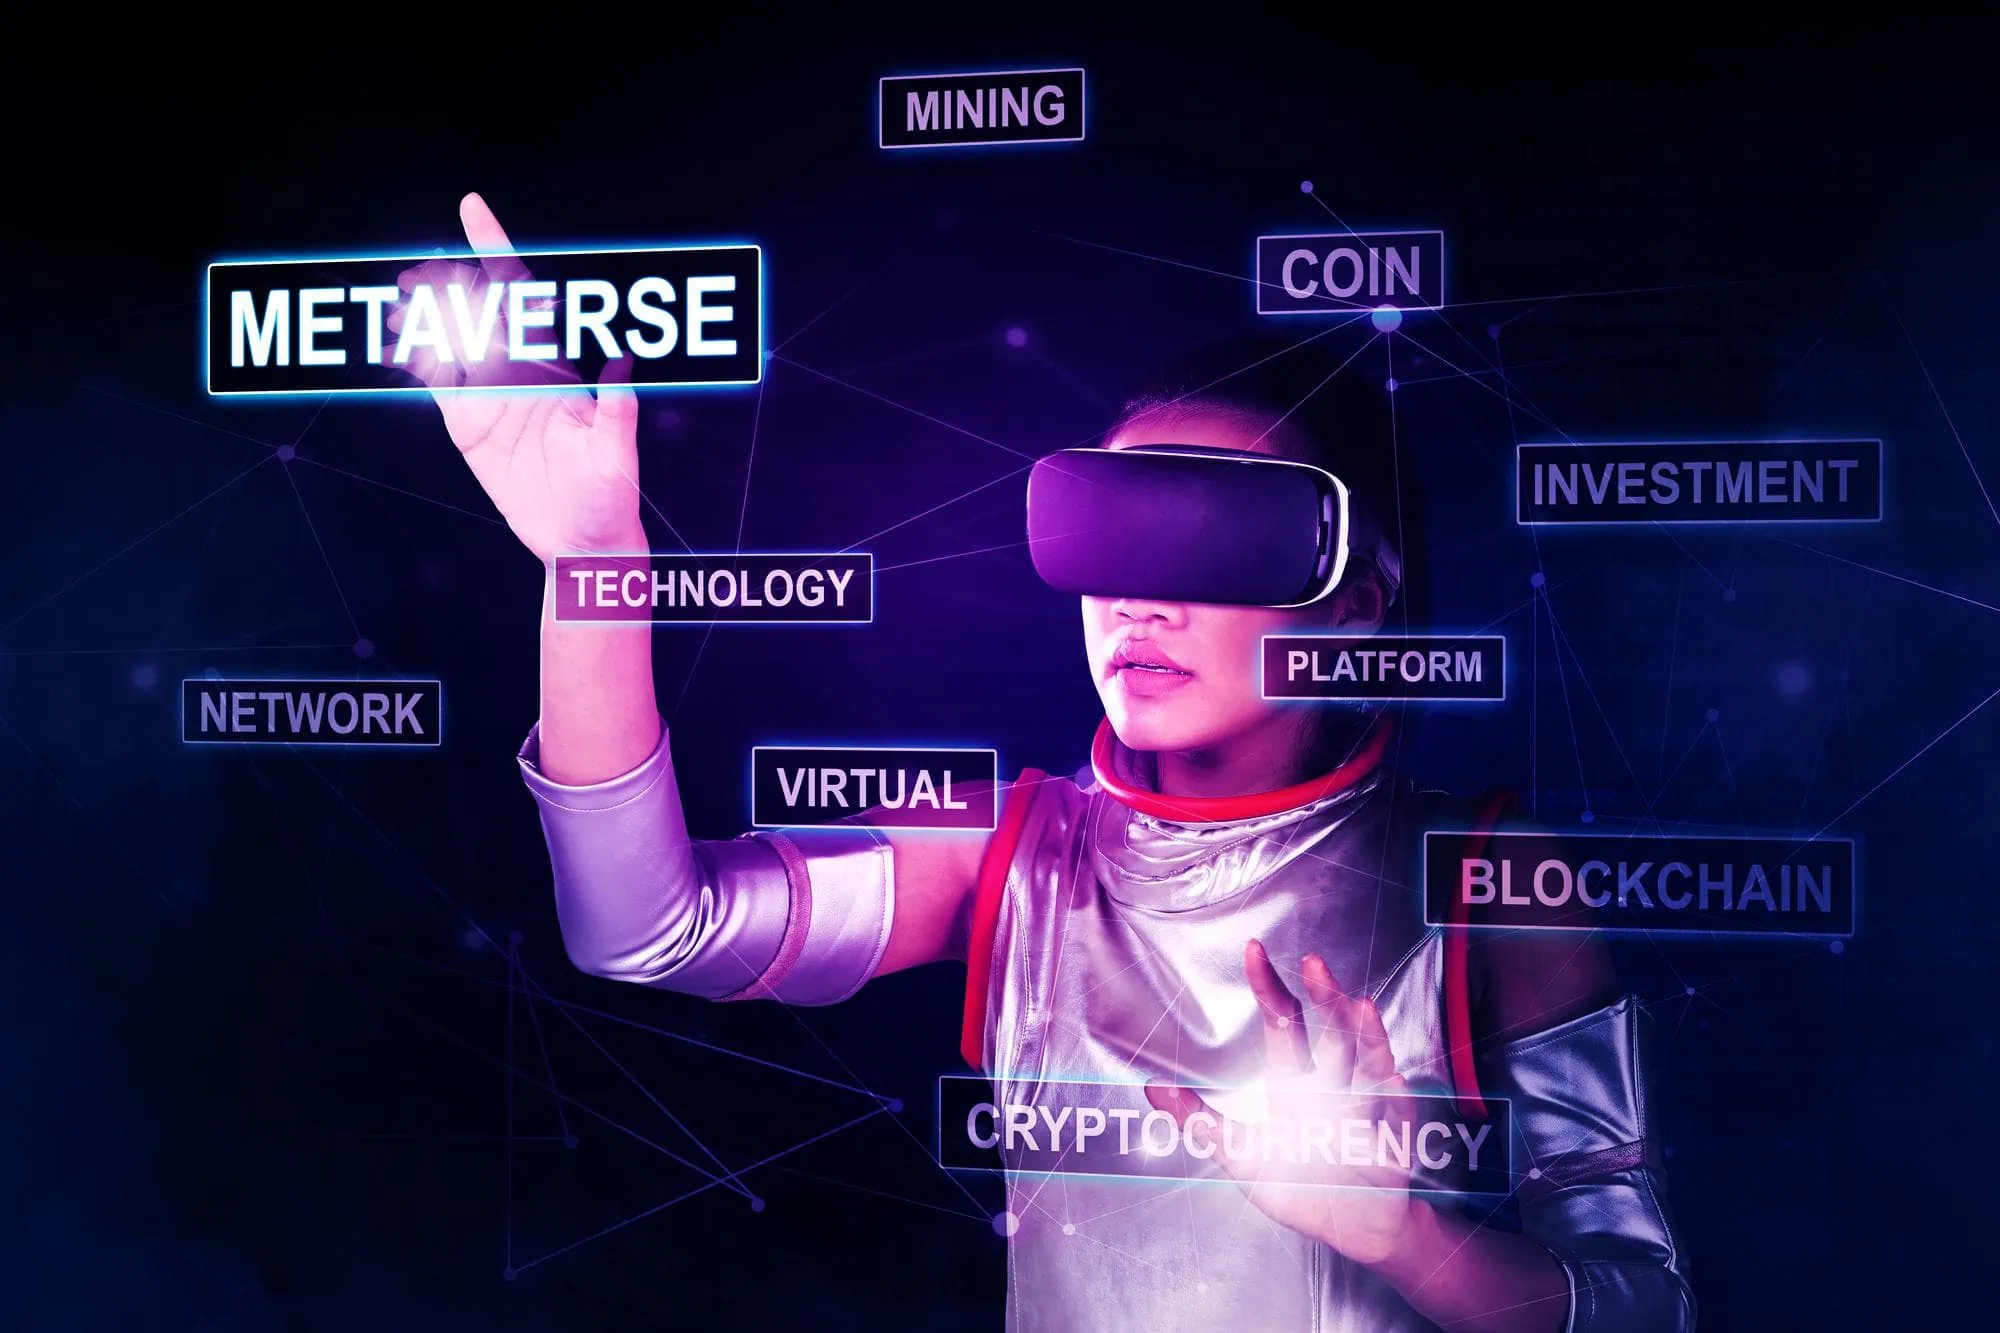 Key Graphic Trends in the Metaverse